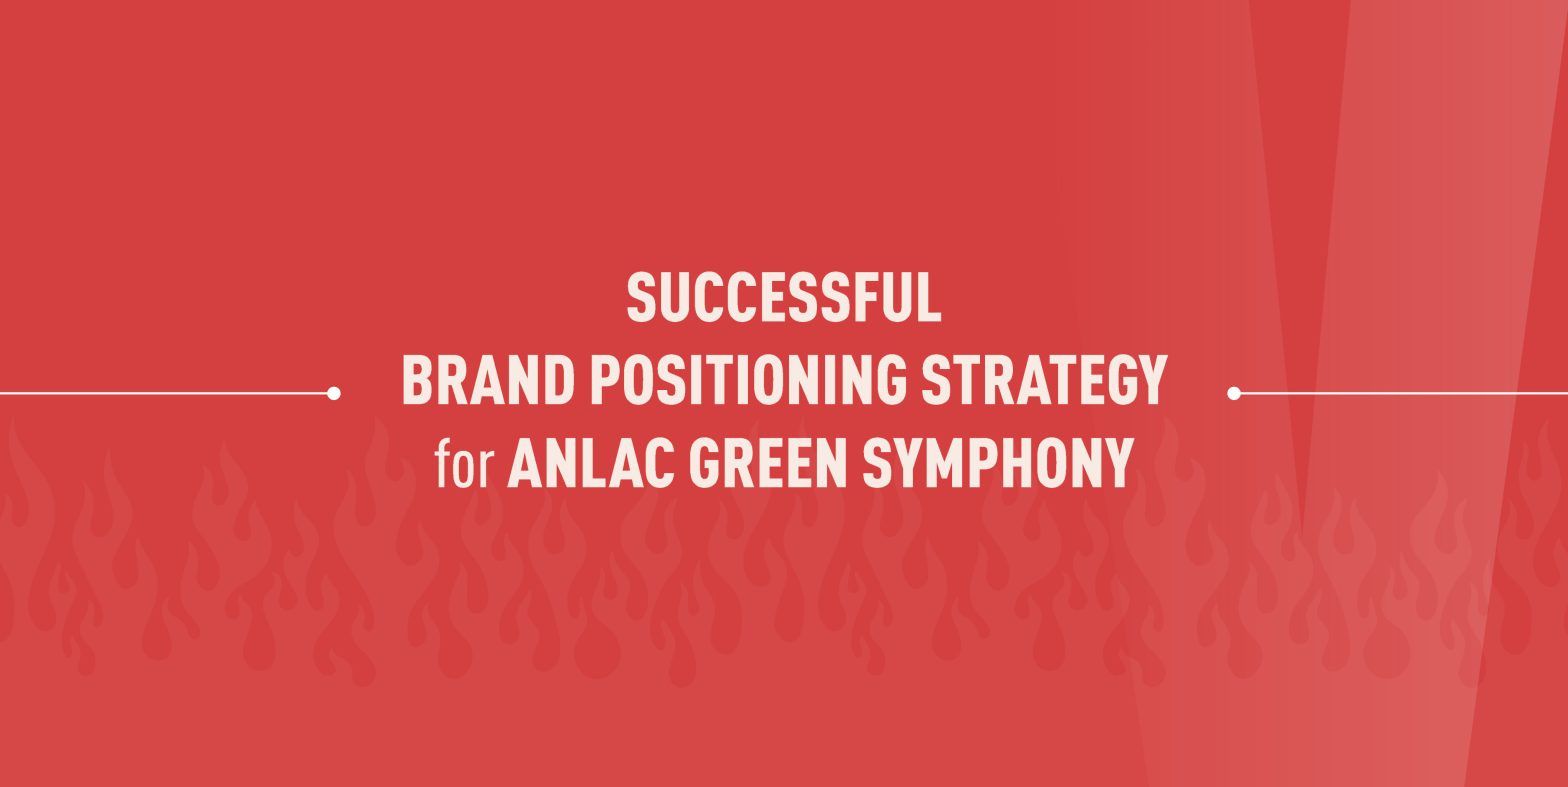 SUCCESSFUL BRAND POSITIONING STRATEGY FOR      ANLAC GREEN SYMPHONY TOWNSHIP